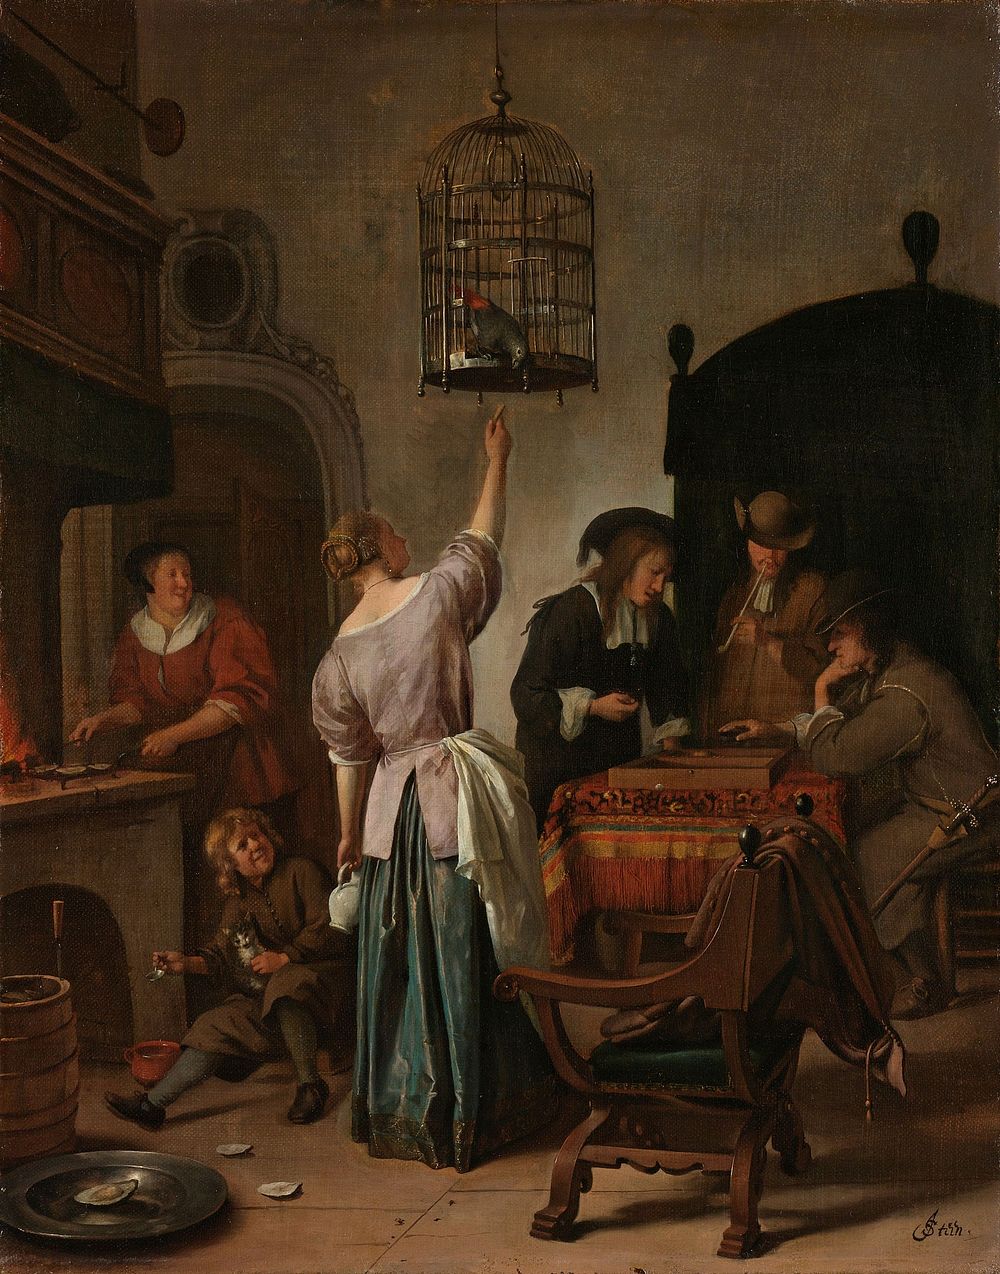 Interior with a Woman Feeding a Parrot, Known as ‘The Parrot Cage’ (c. 1660 - c. 1670) by Jan Havicksz Steen